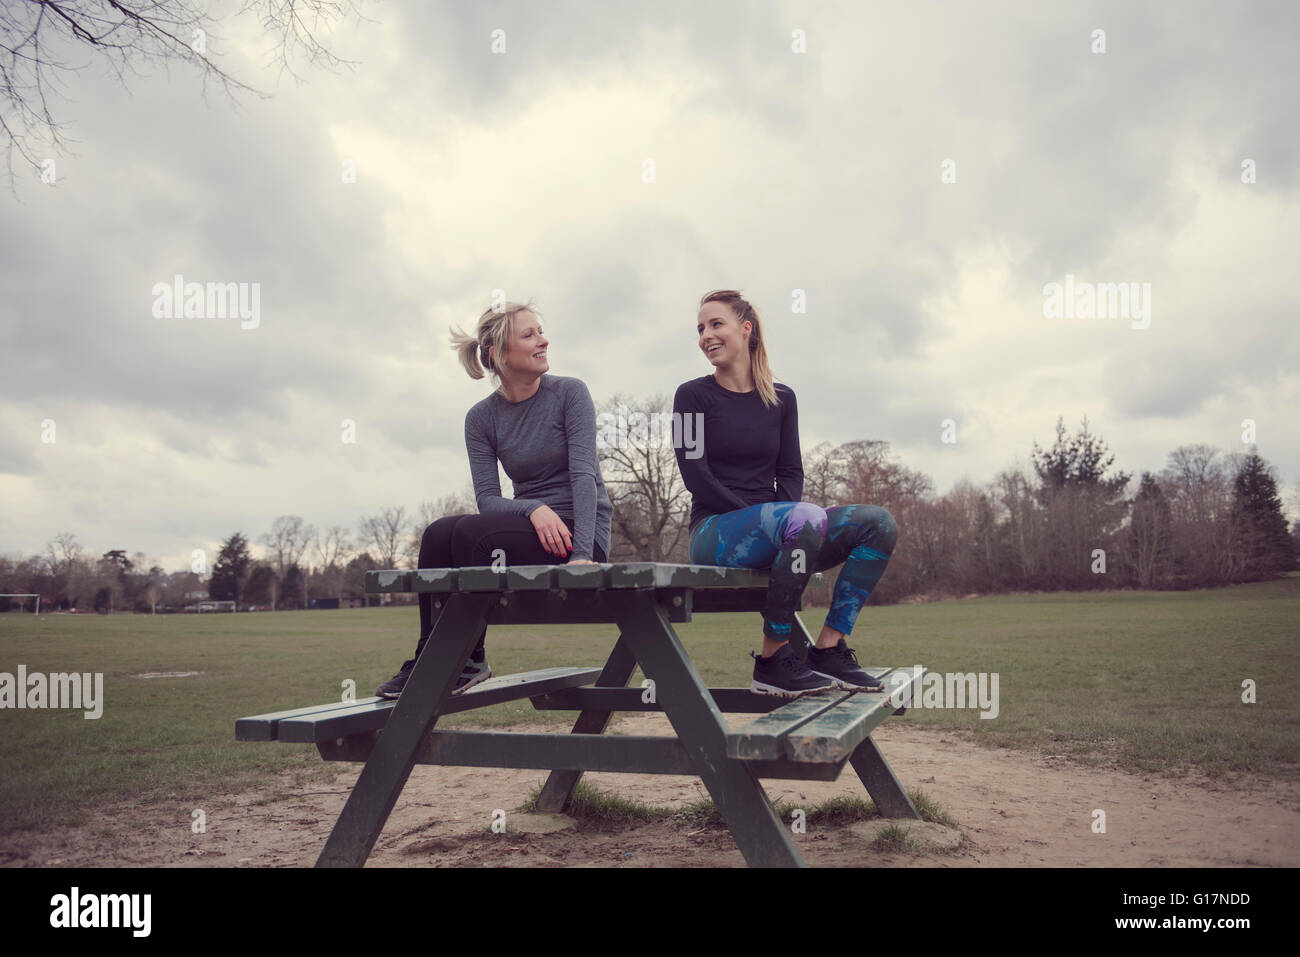 Women wearing sports clothing sitting on picnic table chatting Stock Photo